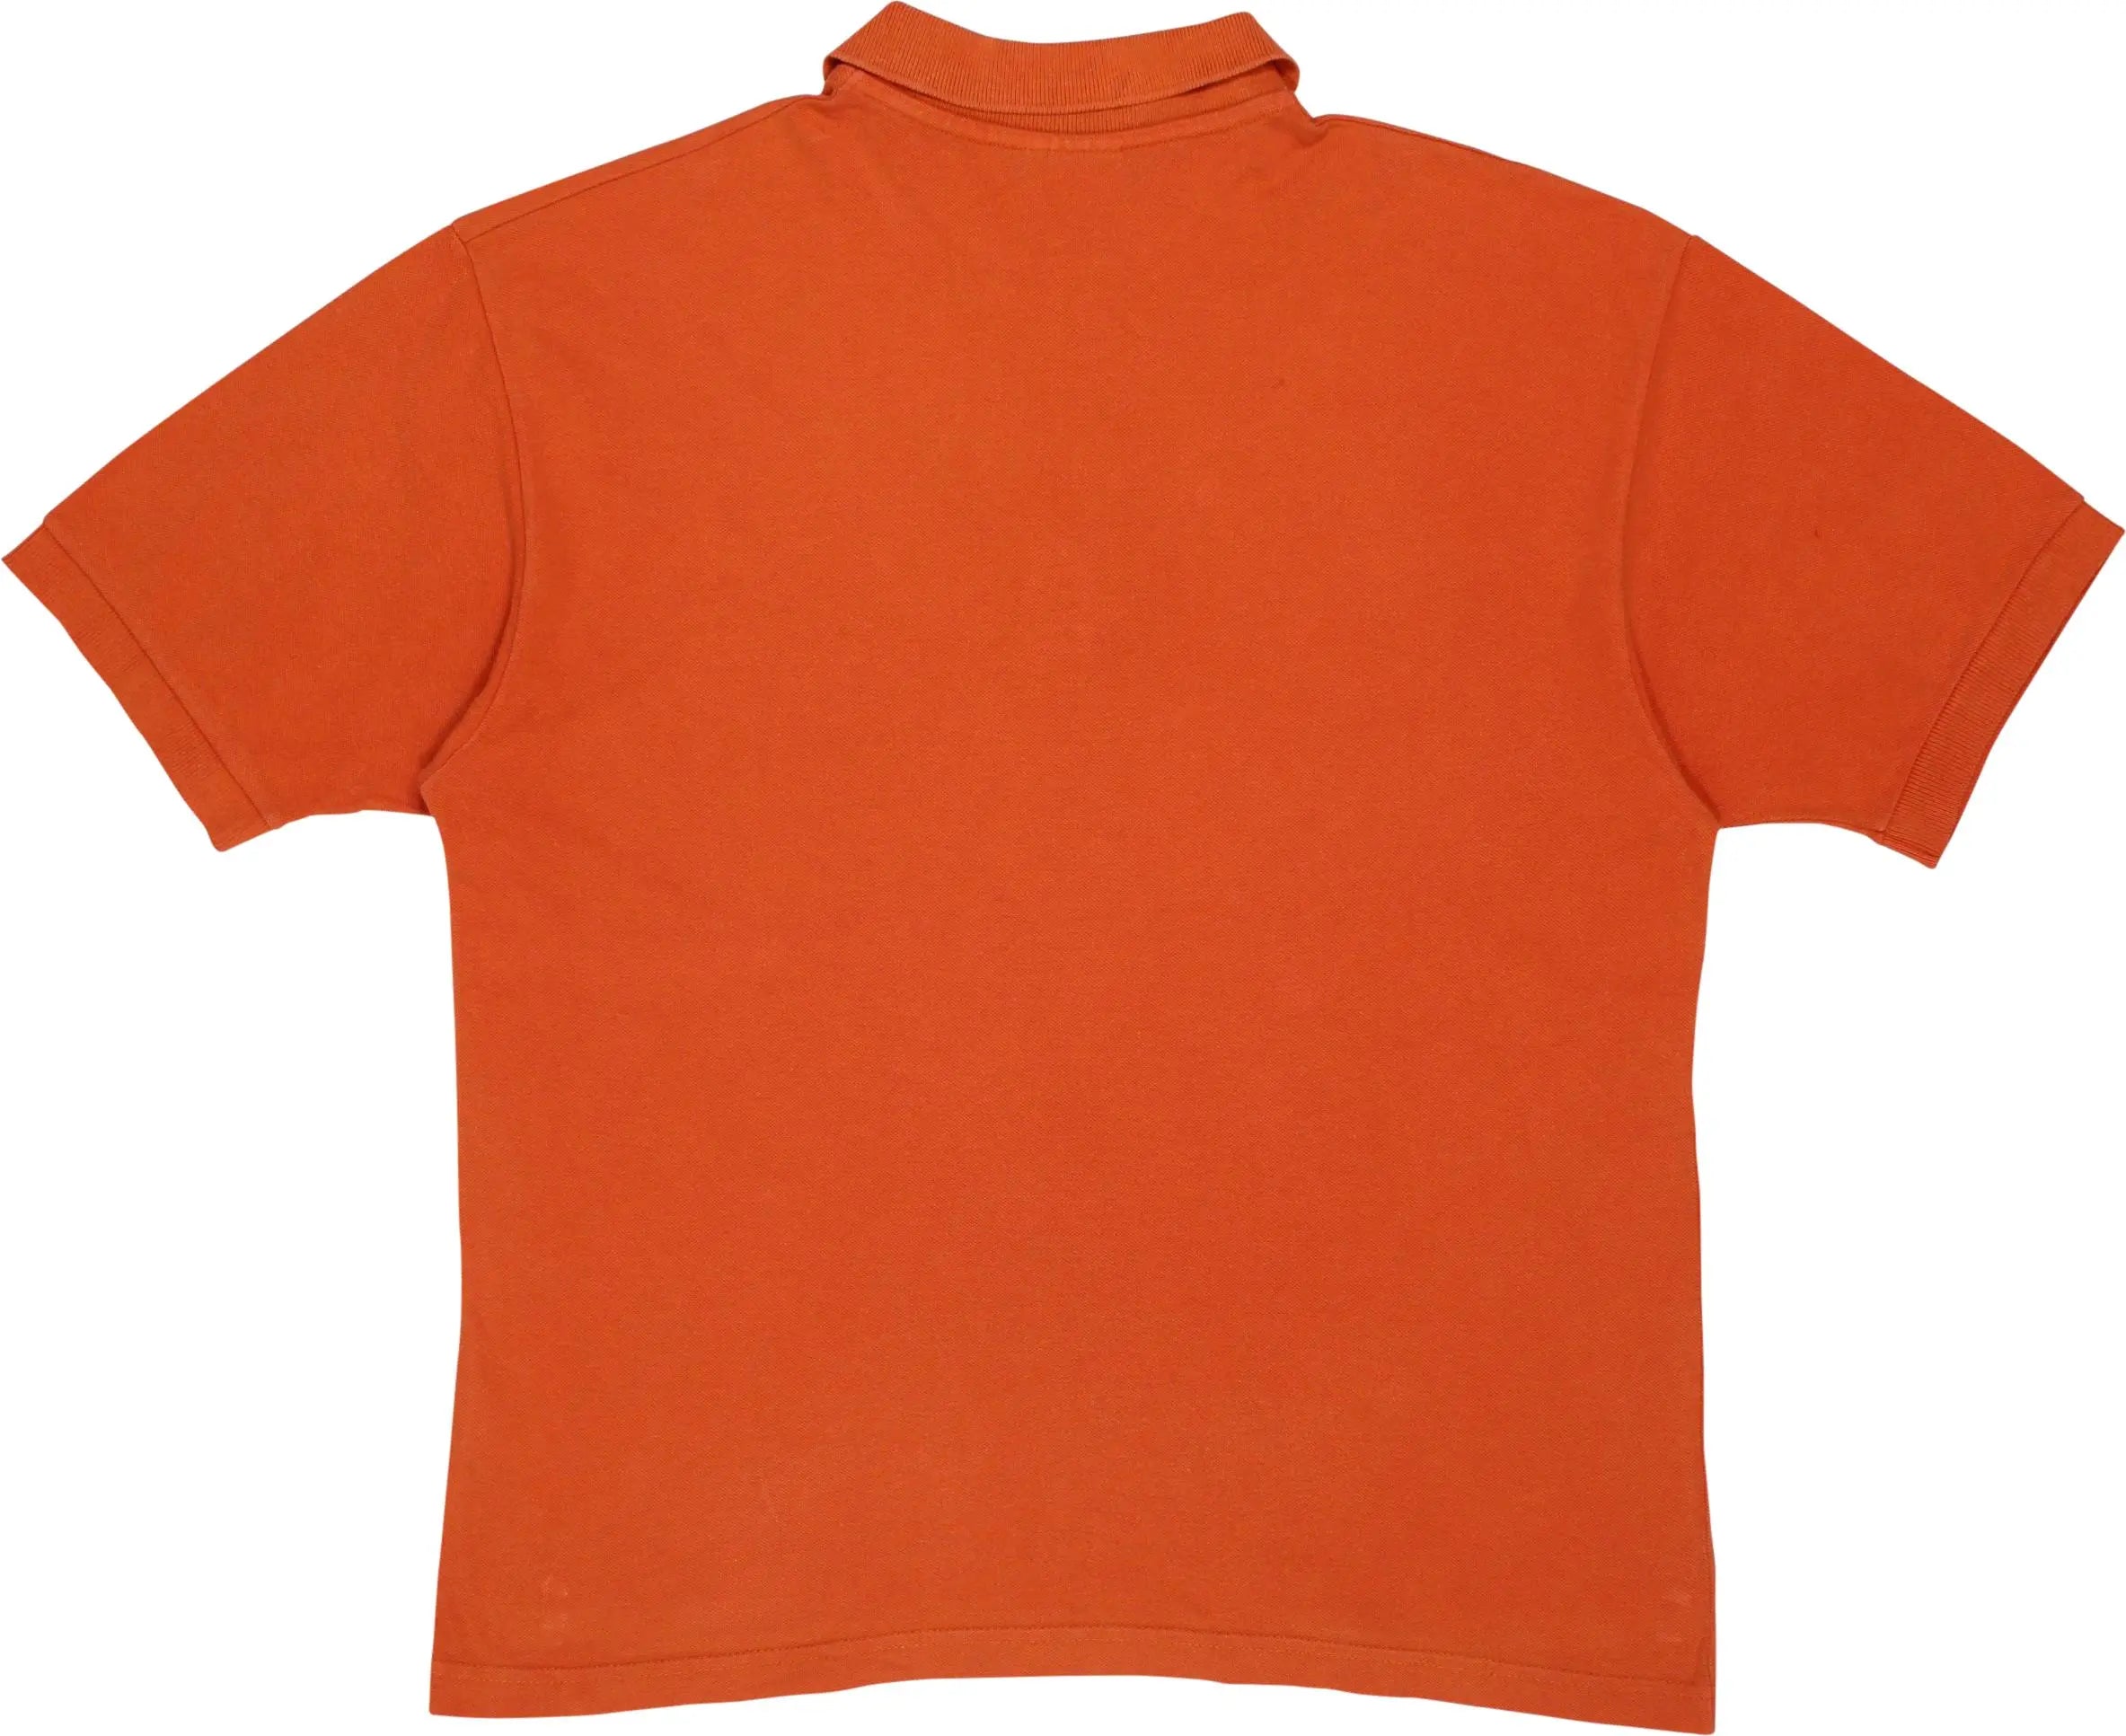 Trussardi - Orange Polo Shirt by Trussardi- ThriftTale.com - Vintage and second handclothing